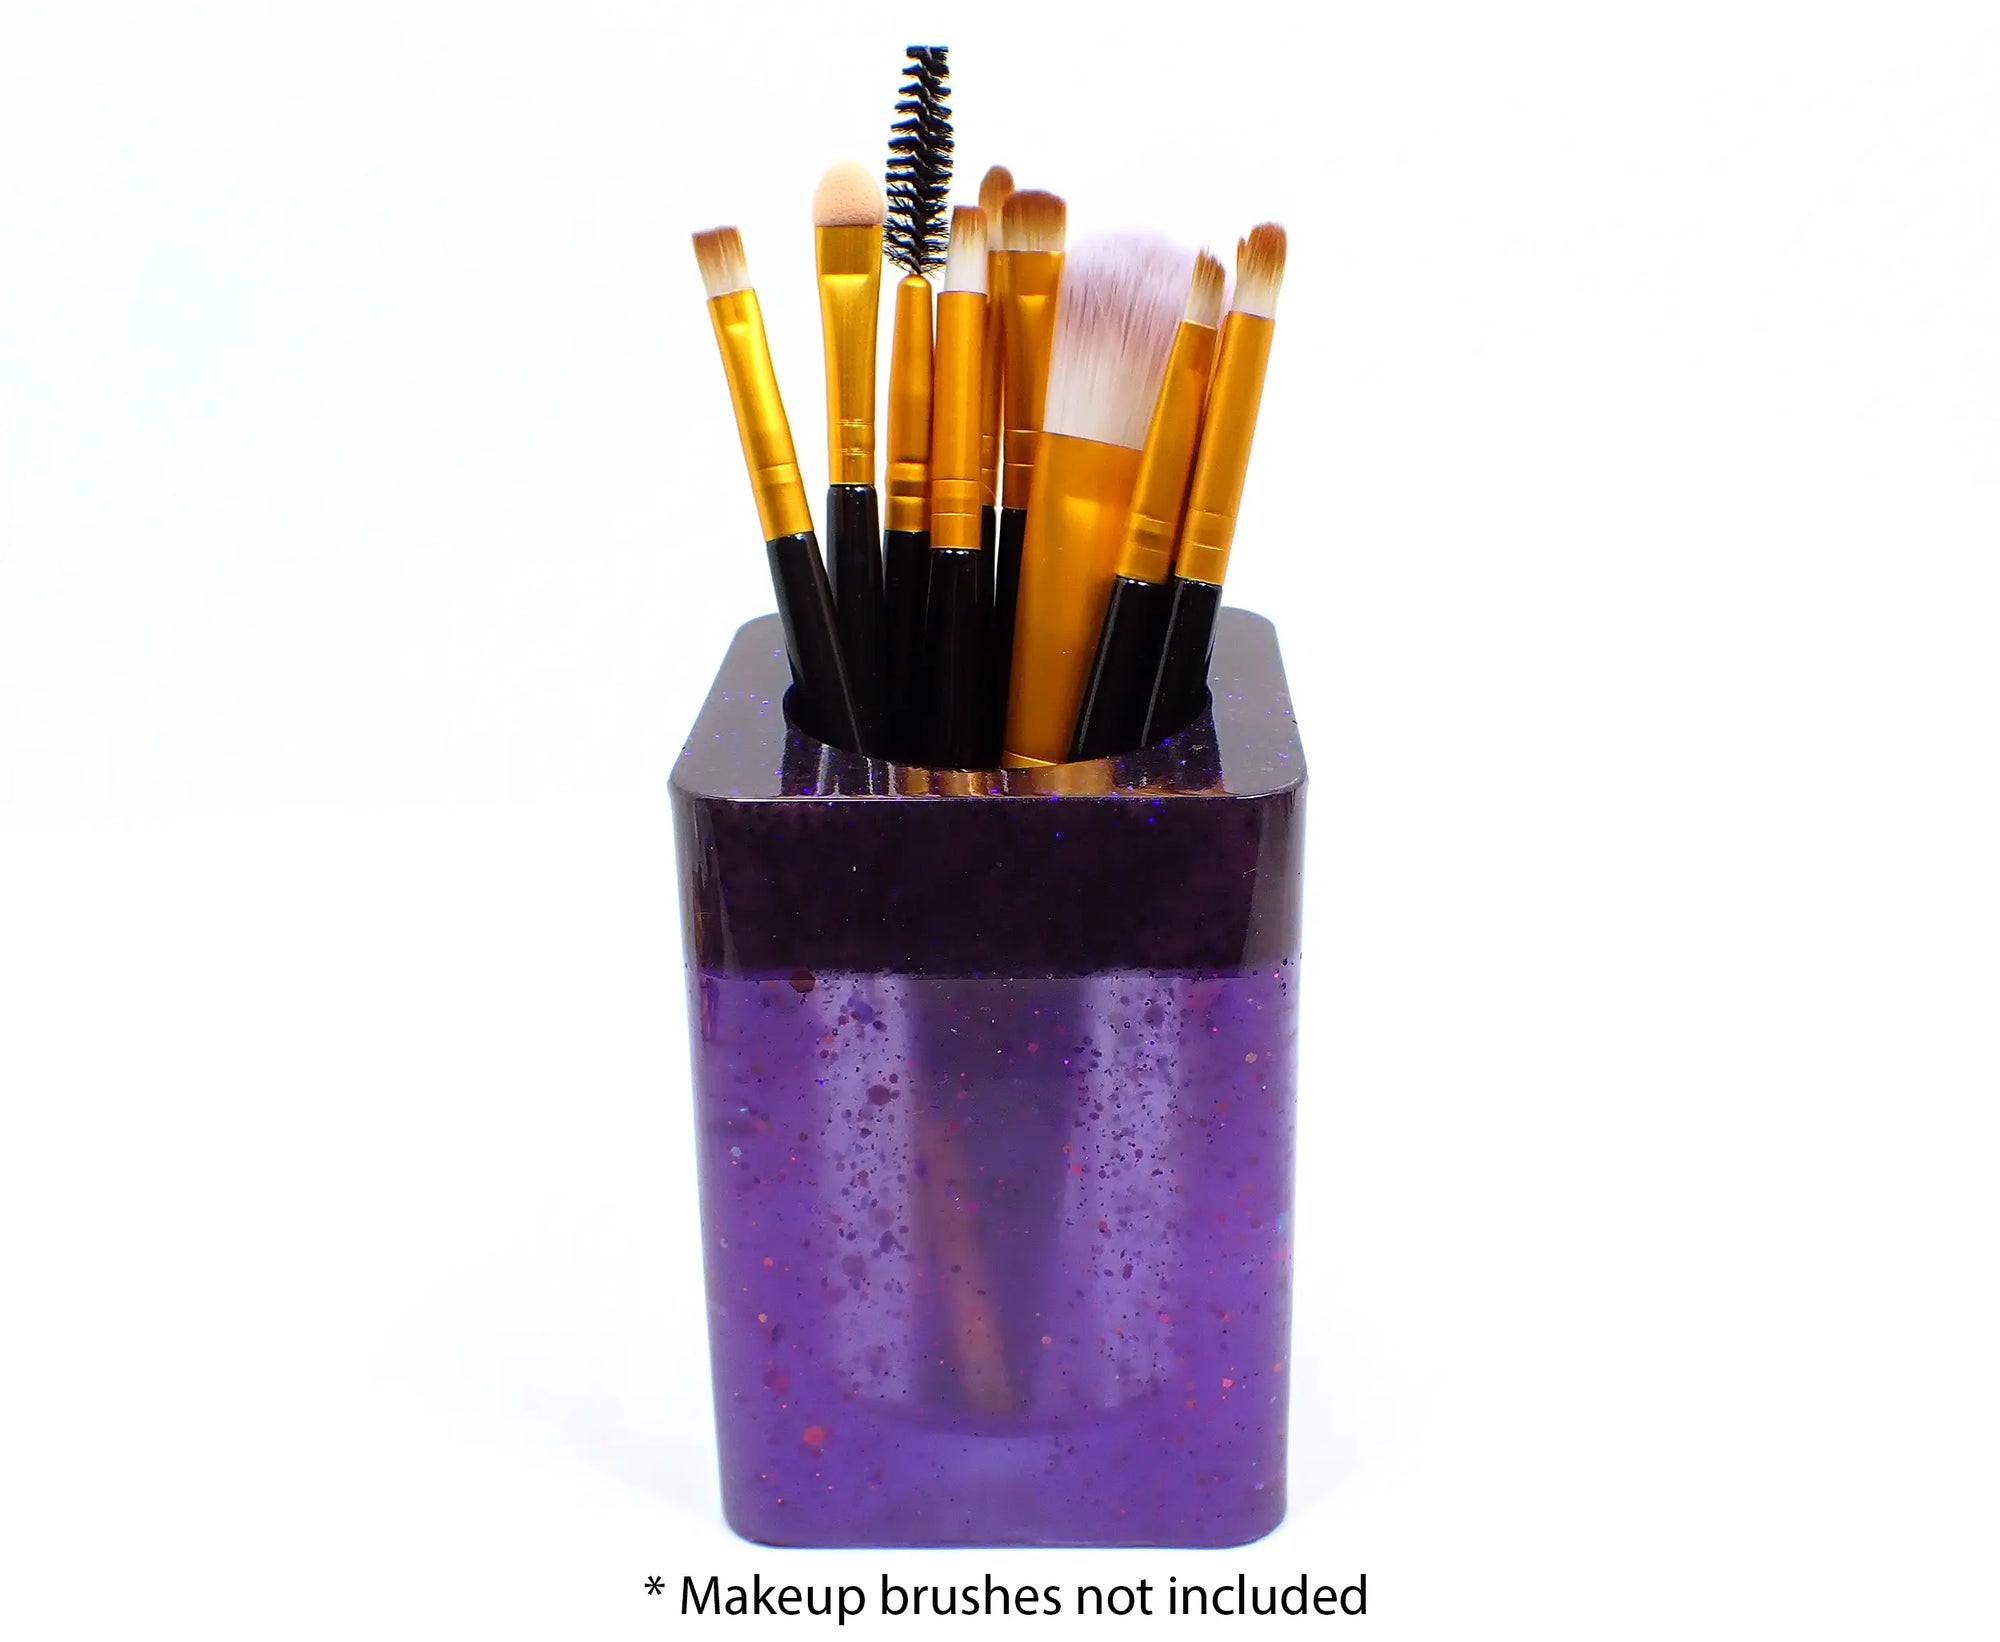 Photo showing how the holder holds makeup brushes. At the bottom it says "makeup brushes not included."